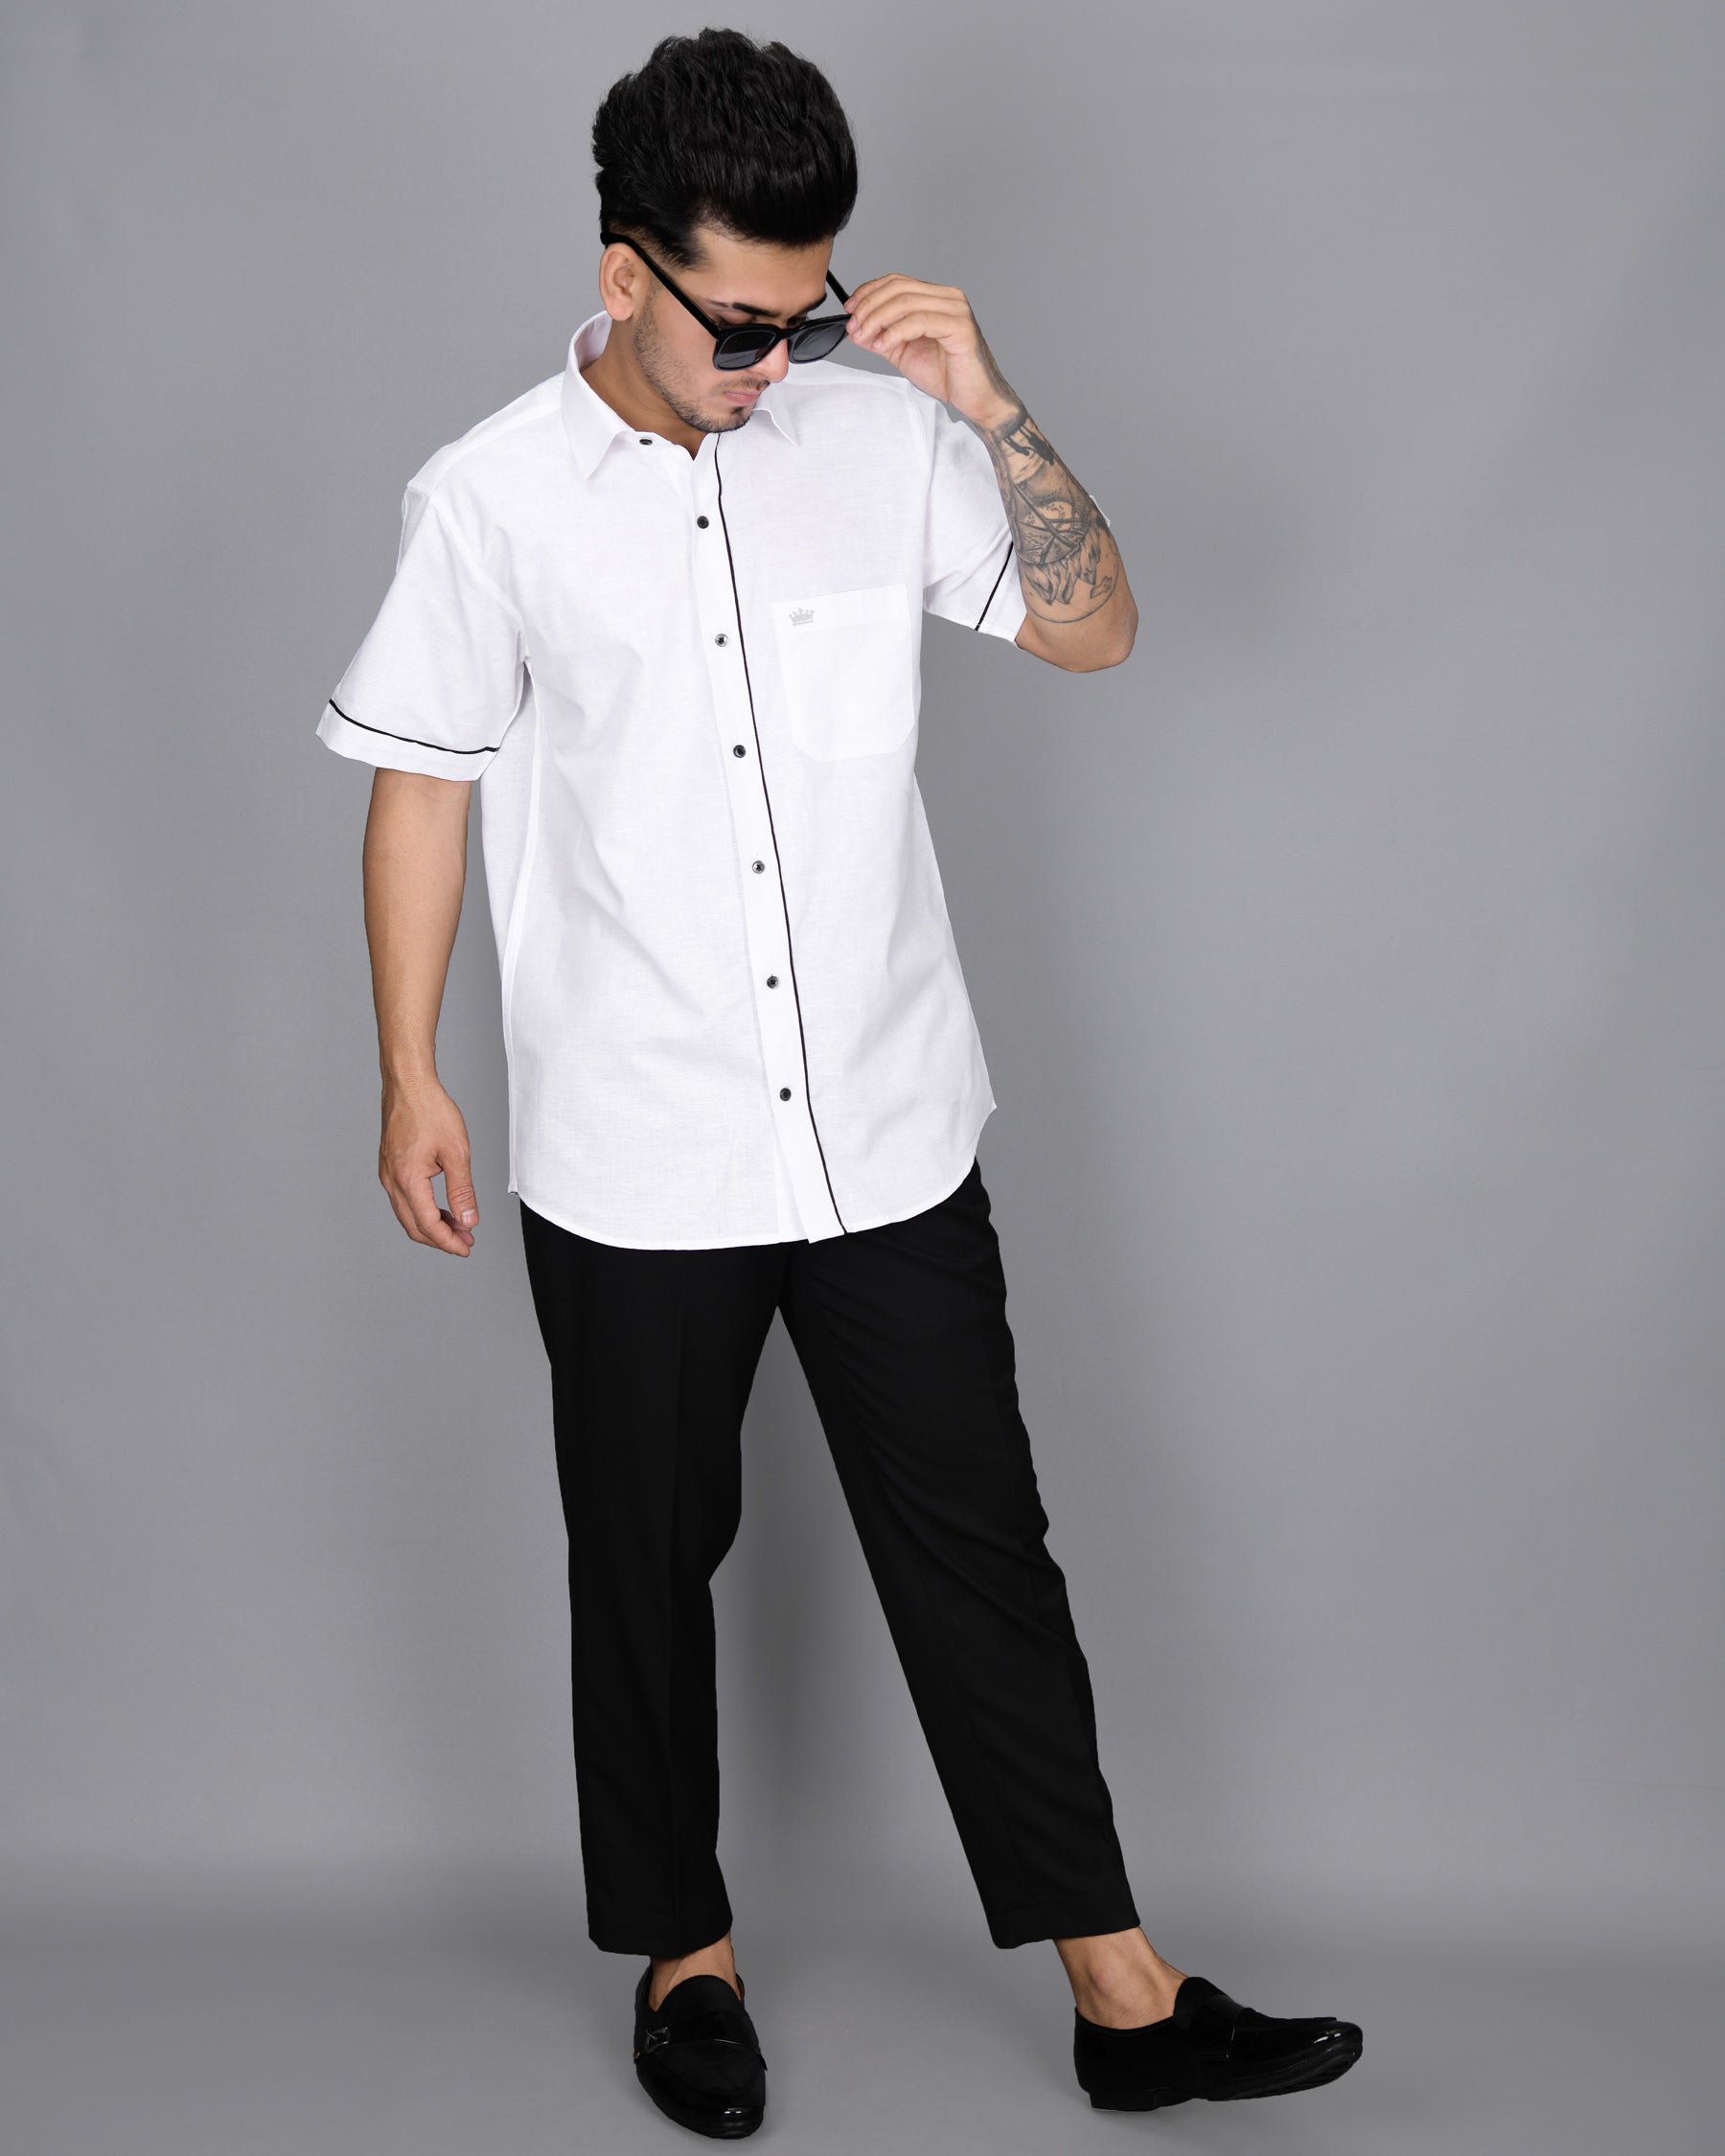 Bright White with Black Piping Luxurious Linen Shirt 3190BLK-P19-38, 3190BLK-P19-H-38, 3190BLK-P19-39, 3190BLK-P19-H-39, 3190BLK-P19-40, 3190BLK-P19-H-40, 3190BLK-P19-42, 3190BLK-P19-H-42, 3190BLK-P19-44, 3190BLK-P19-H-44, 3190BLK-P19-46, 3190BLK-P19-H-46, 3190BLK-P19-48, 3190BLK-P19-H-48, 3190BLK-P19-50, 3190BLK-P19-H-50, 3190BLK-P19-52, 3190BLK-P19-H-52